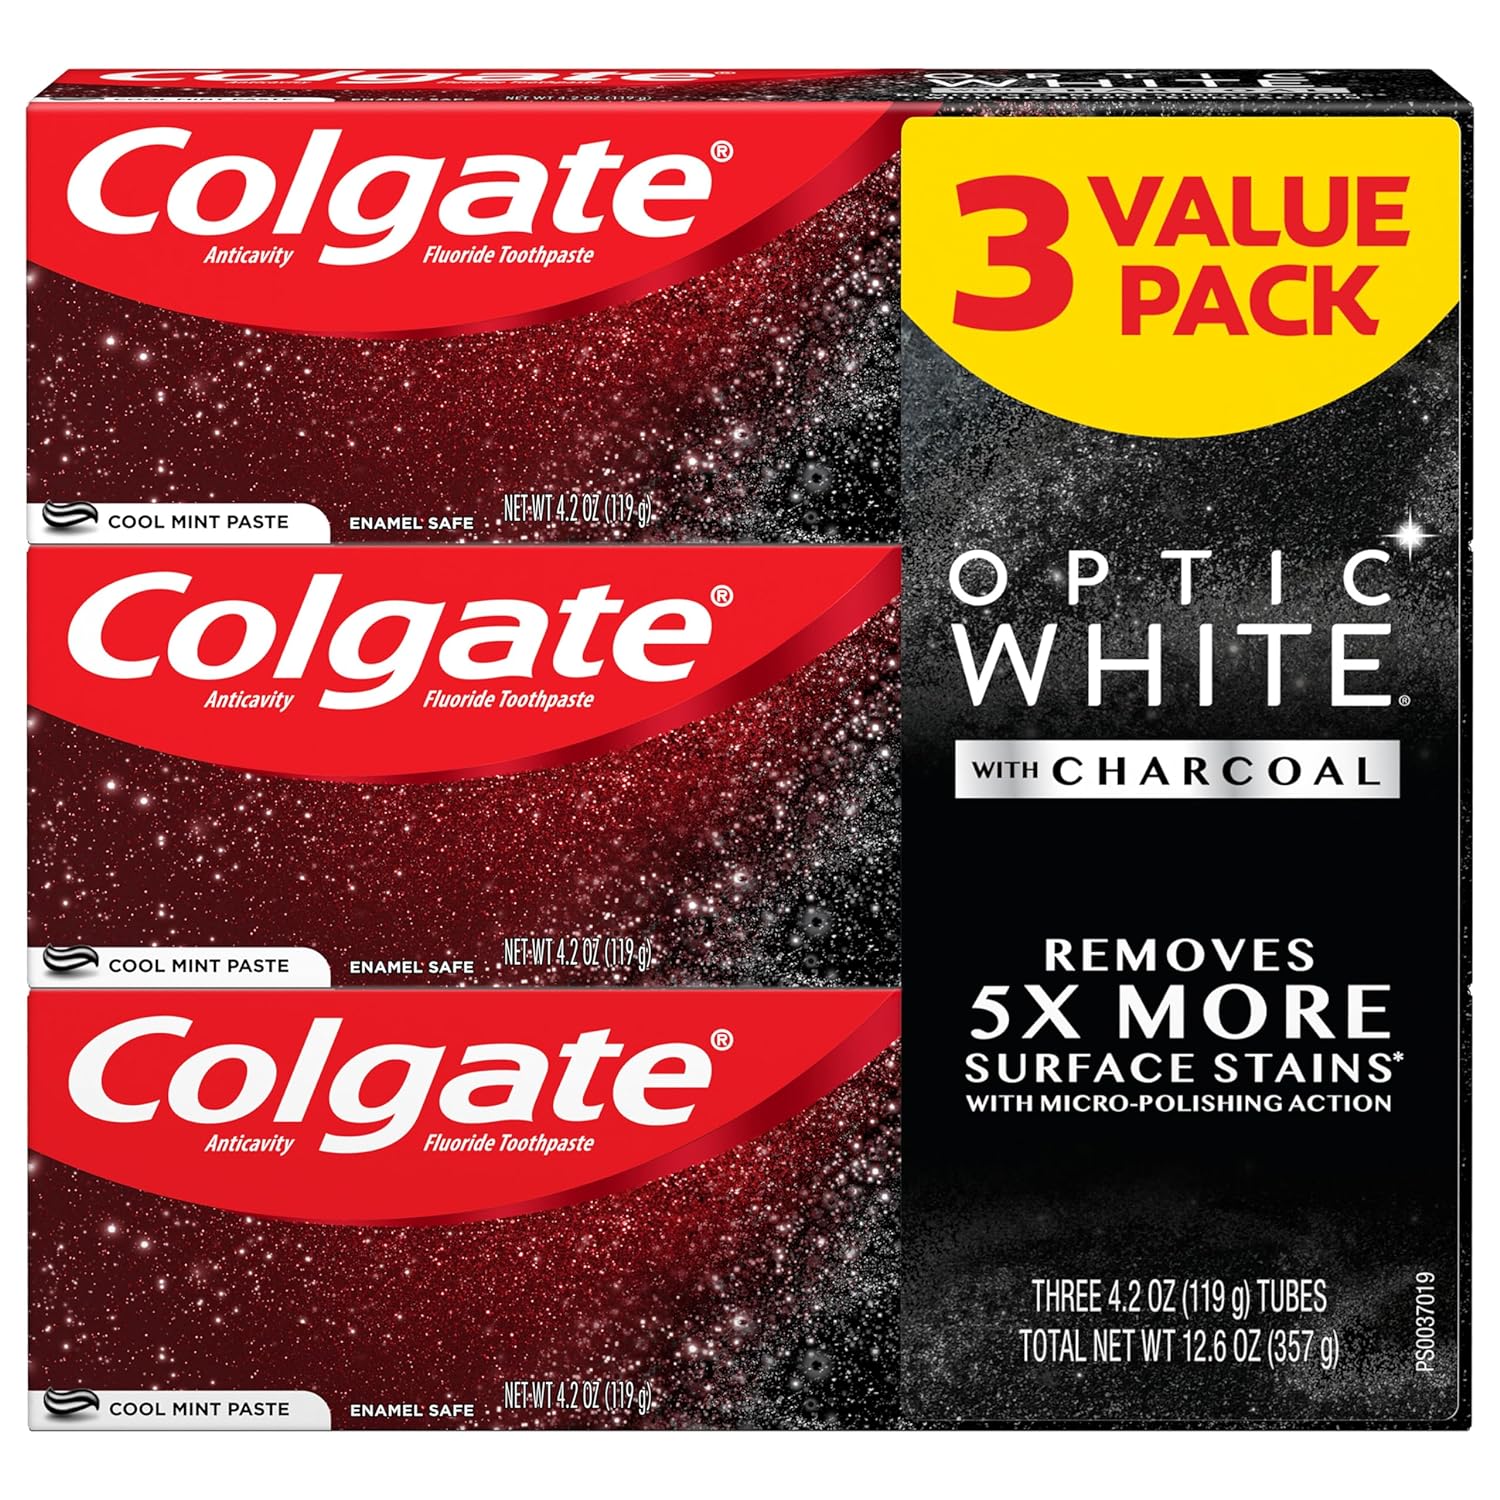 Colgate Optic White with Charcoal Whitening Toothpaste, Cool Mint Flavor, Safely Removes Surface Stains, Enamel-Safe for Daily Use, Teeth Whitening Toothpaste with Fluoride, 3 Pack, 4.2 Oz Tube